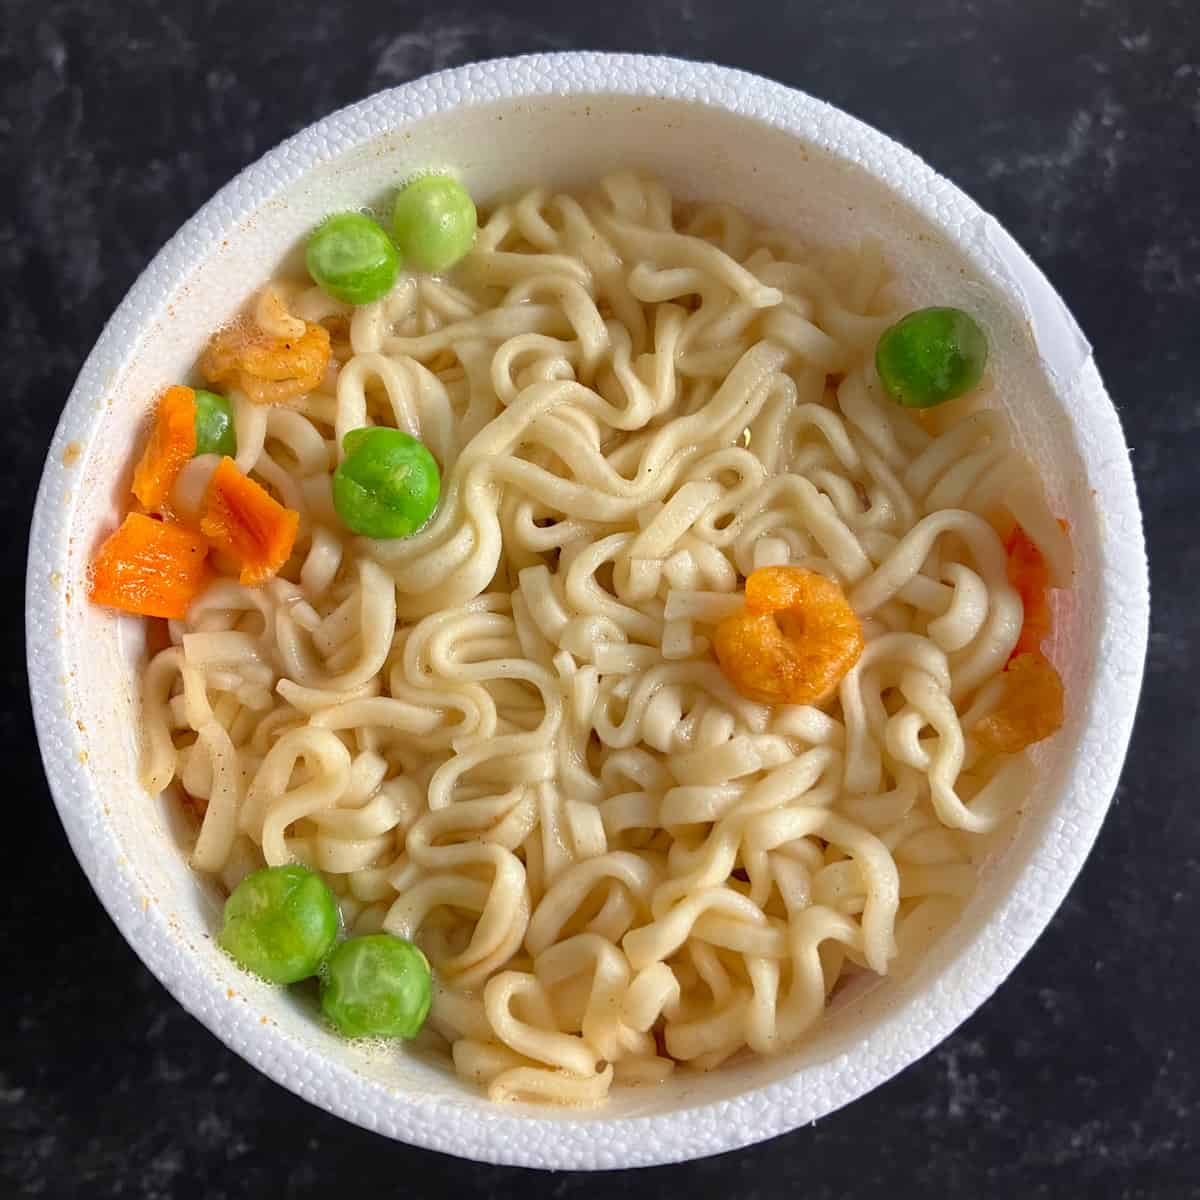 microwave cup of soup